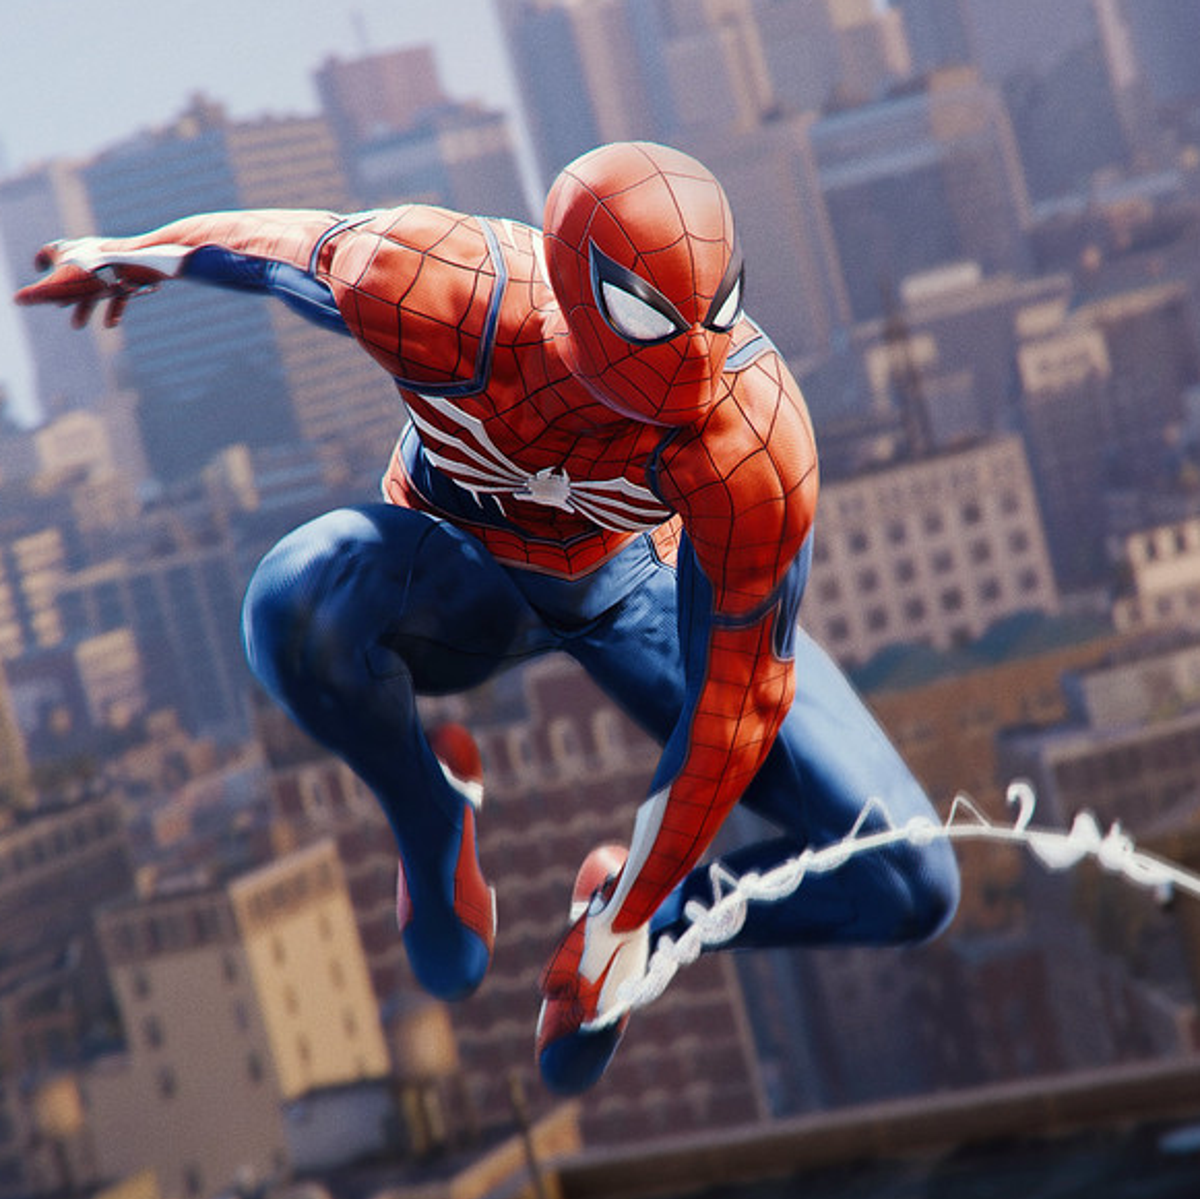 Spider Man Remastered On Pc Adds Option To Link Psn Account